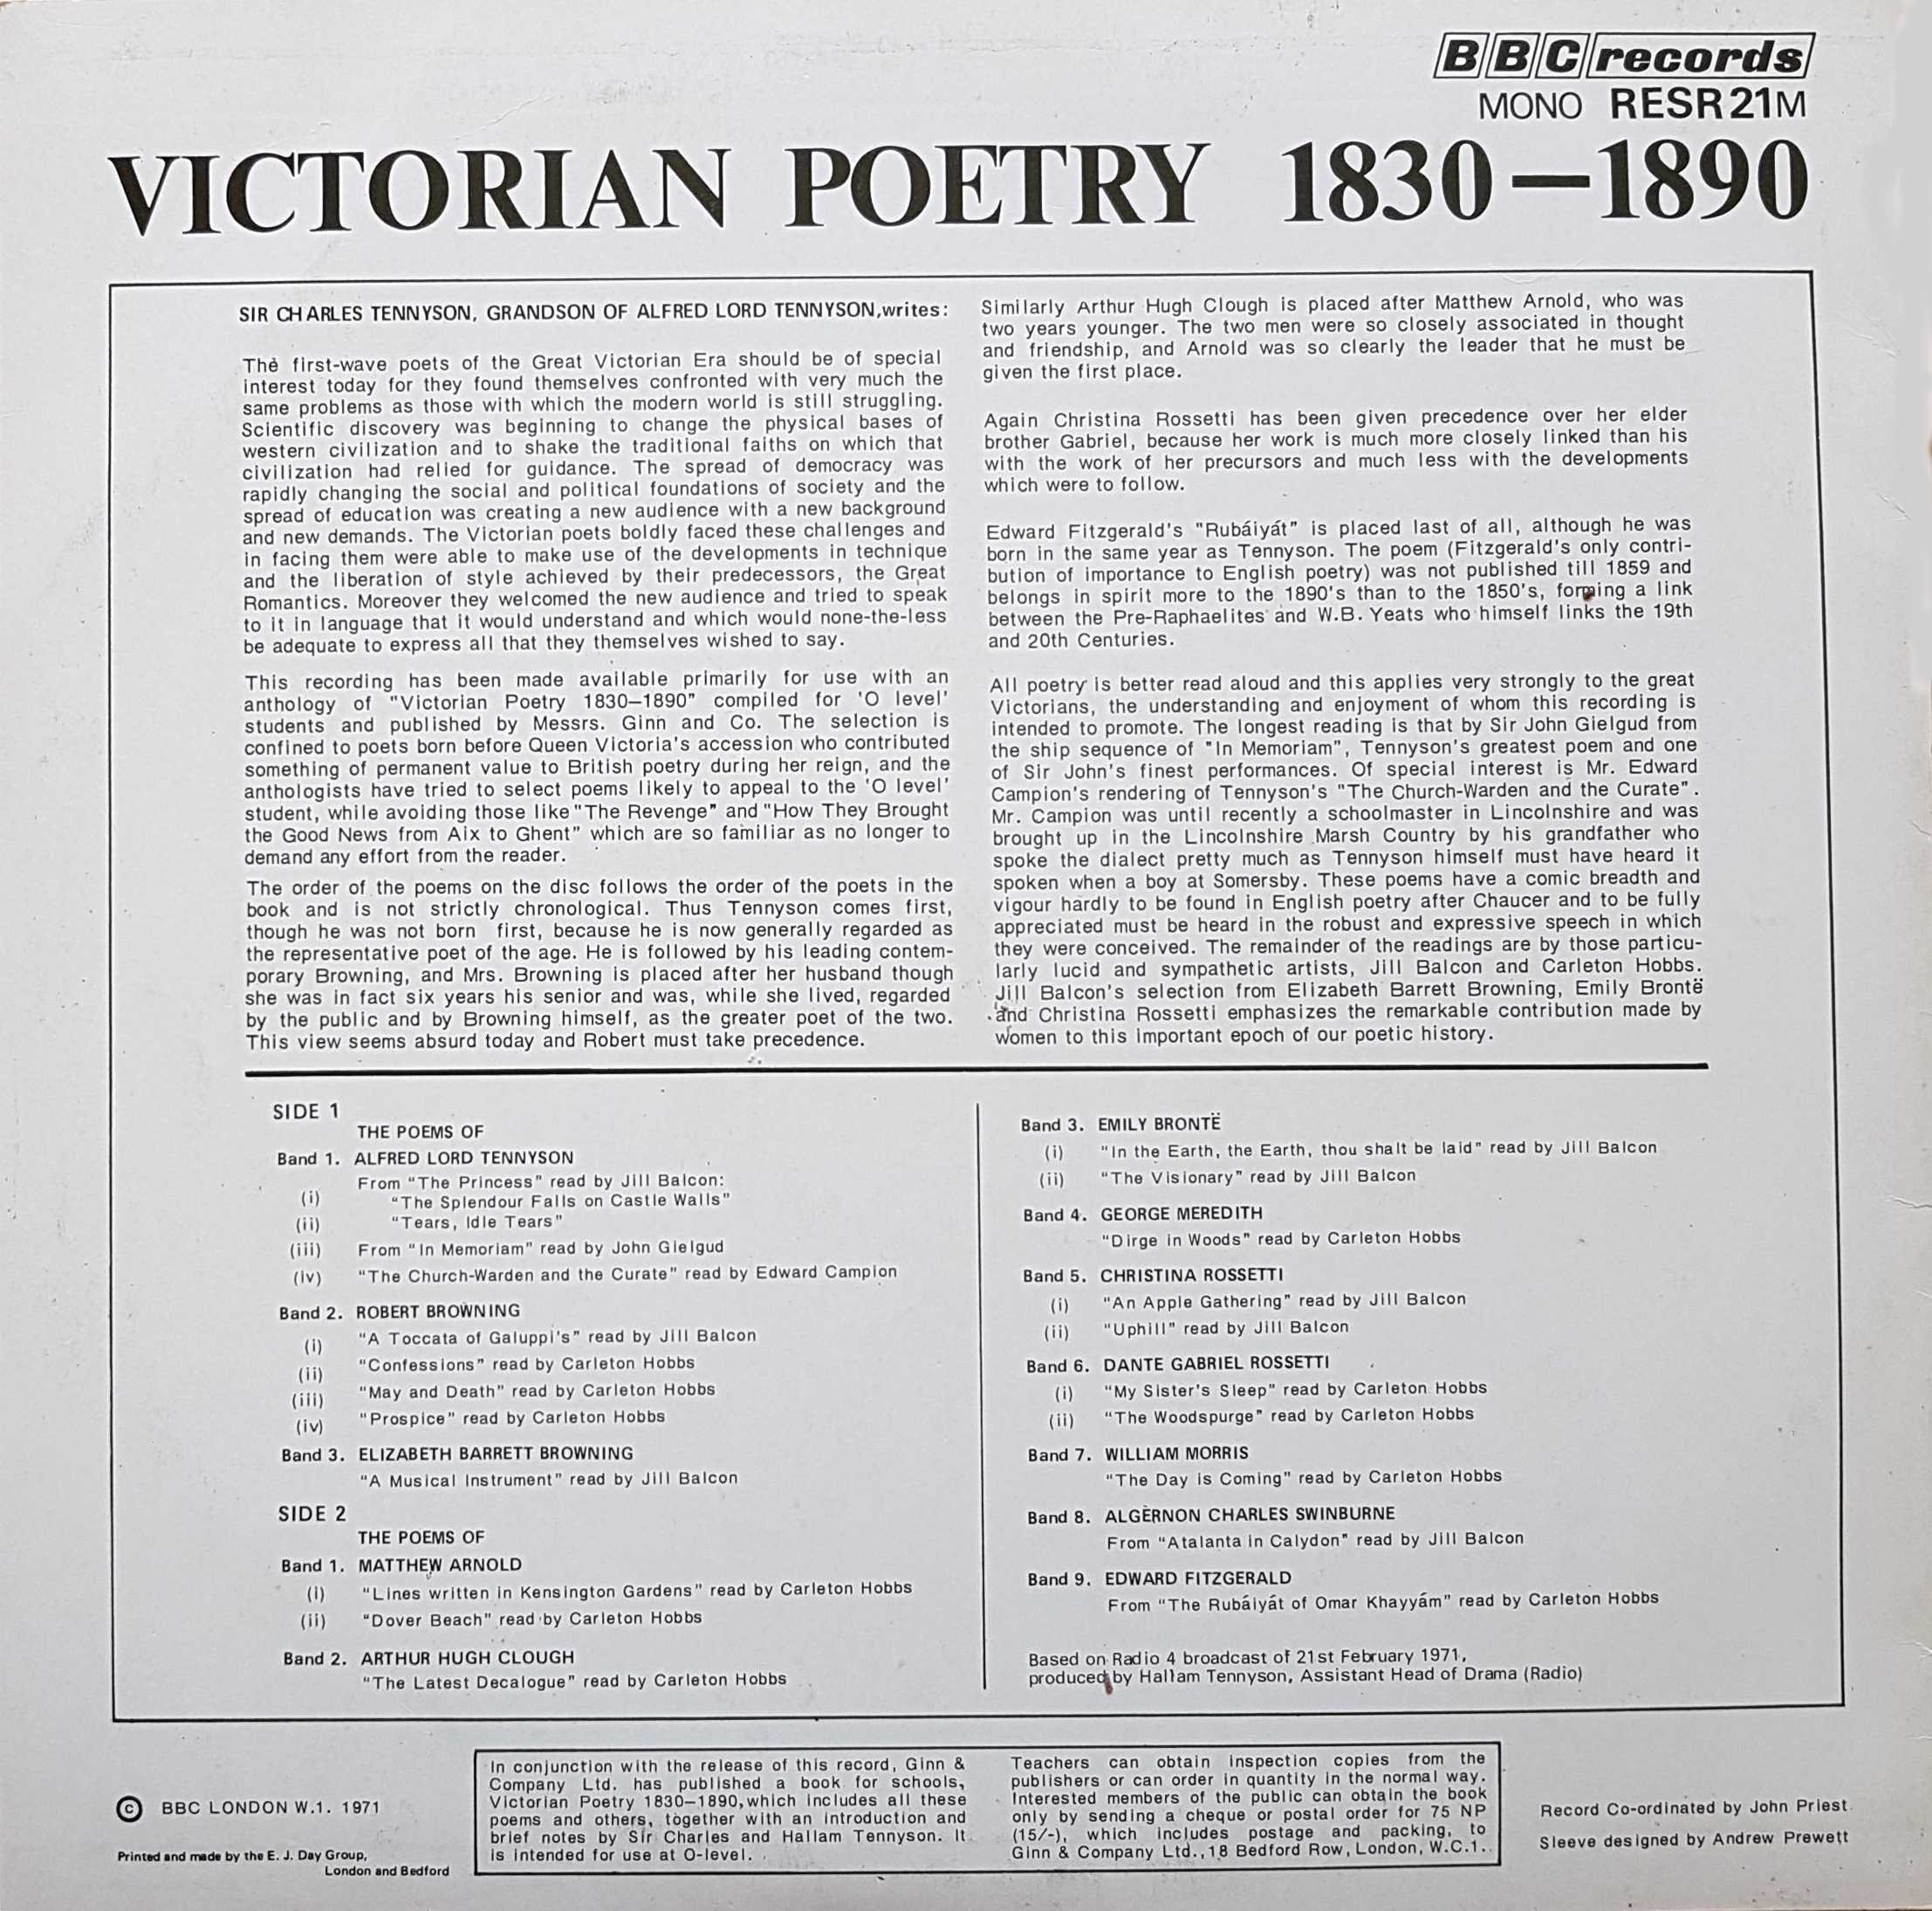 Picture of RESR 21 Victorian poetry 1830-1890 by artist Various from the BBC records and Tapes library